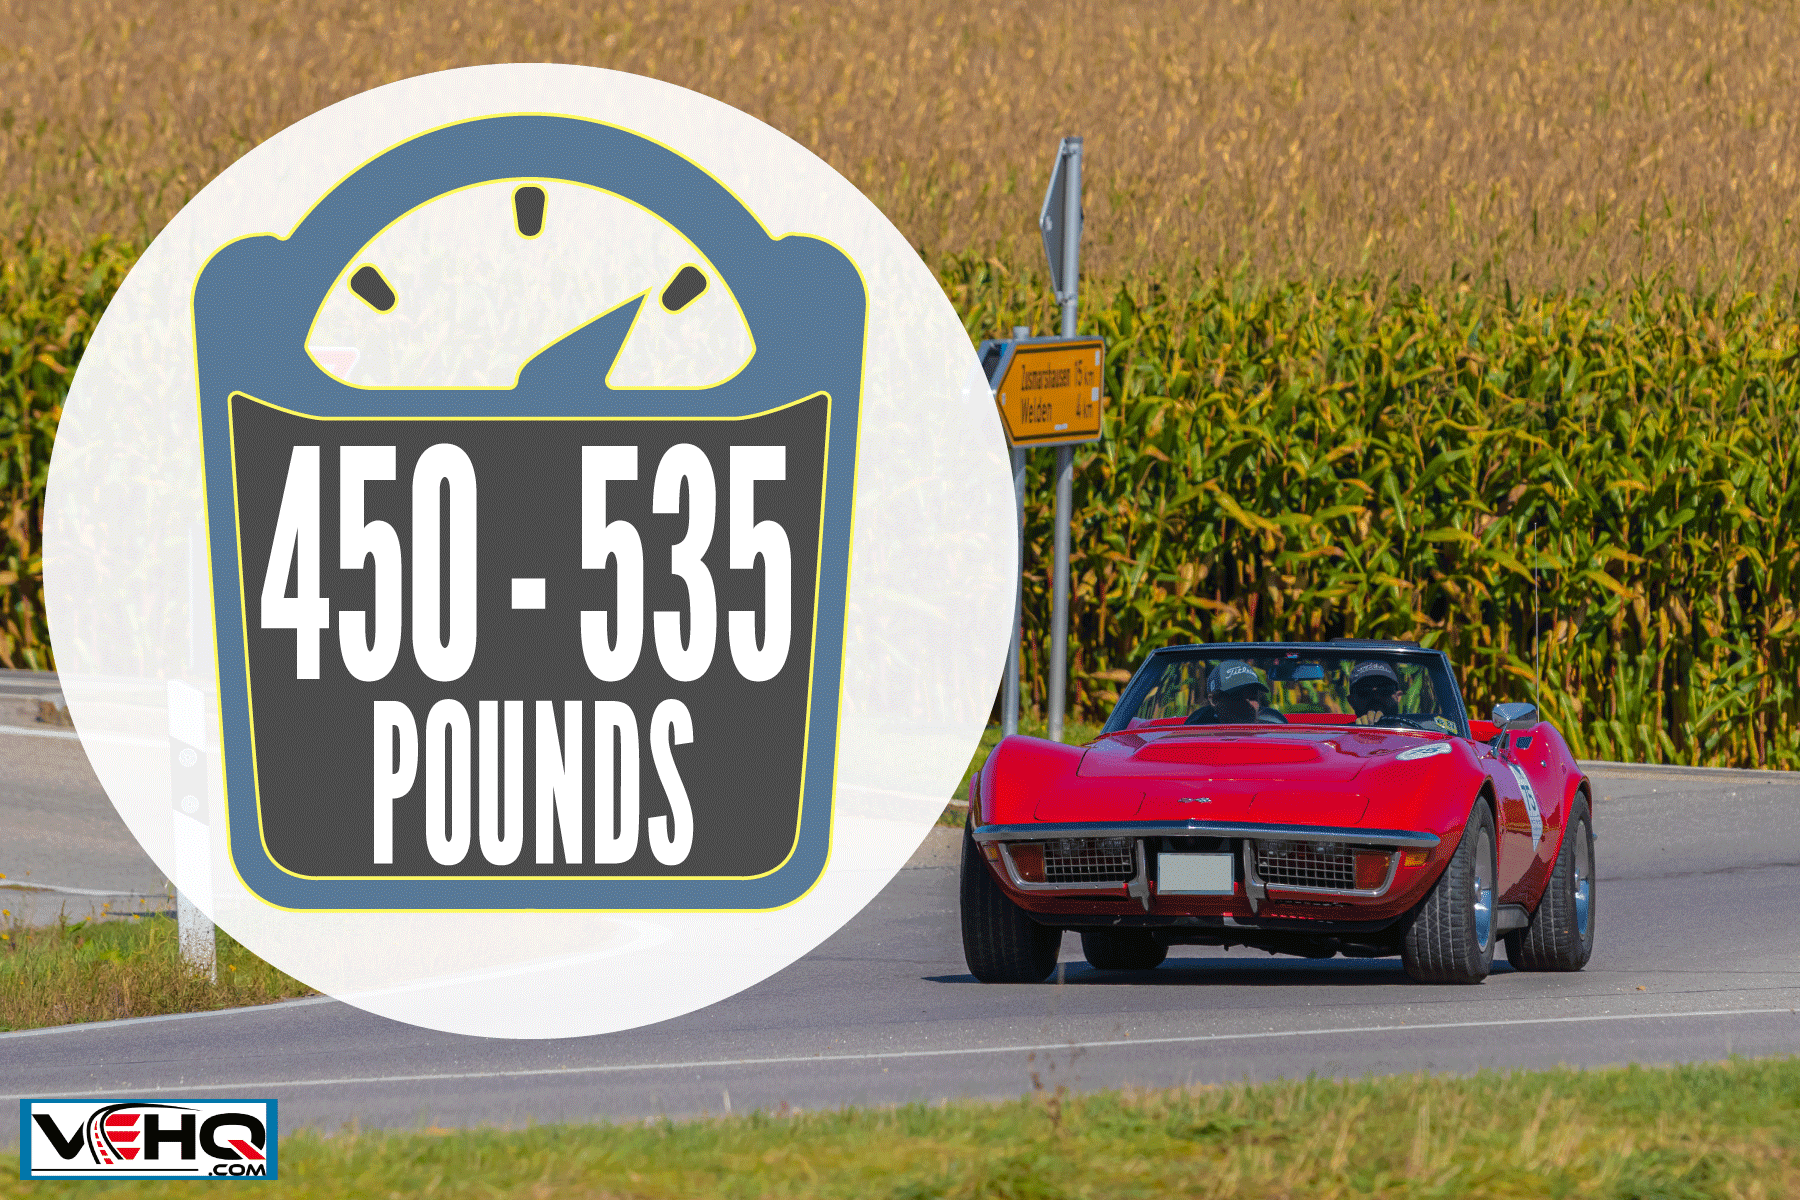 Red colored Chevrolet Corvette, How Much Does A 350 Engine Weigh?